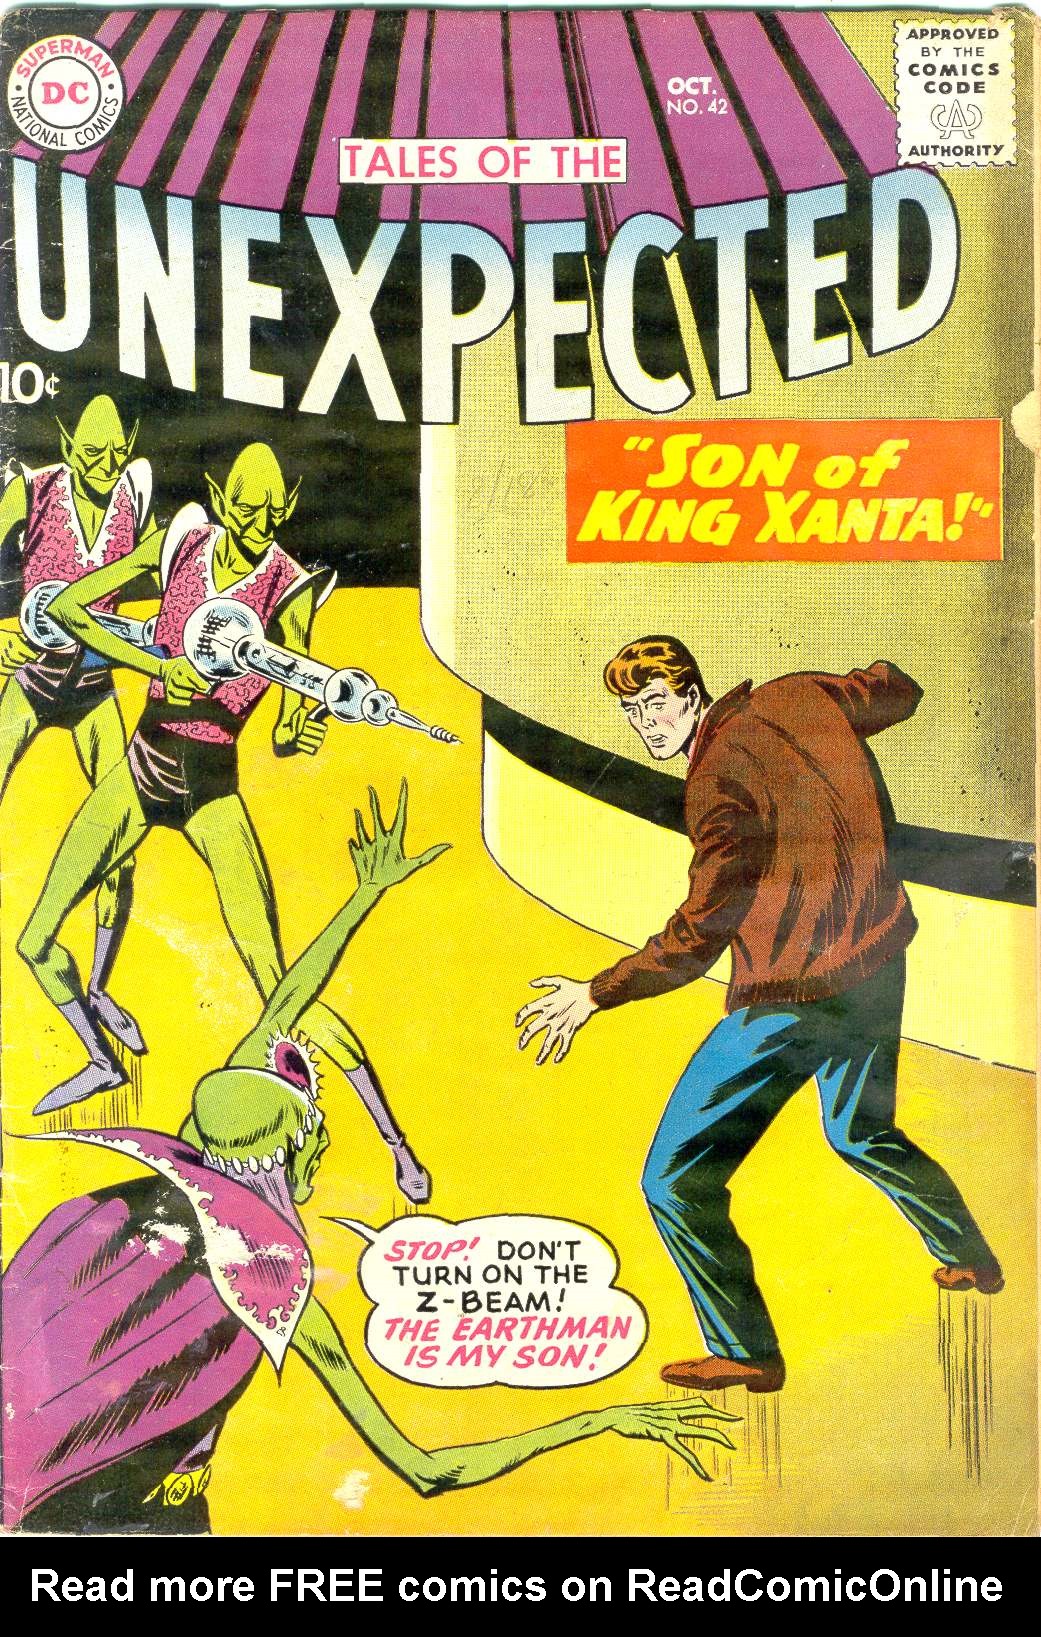 Read online Tales of the Unexpected comic -  Issue #42 - 1